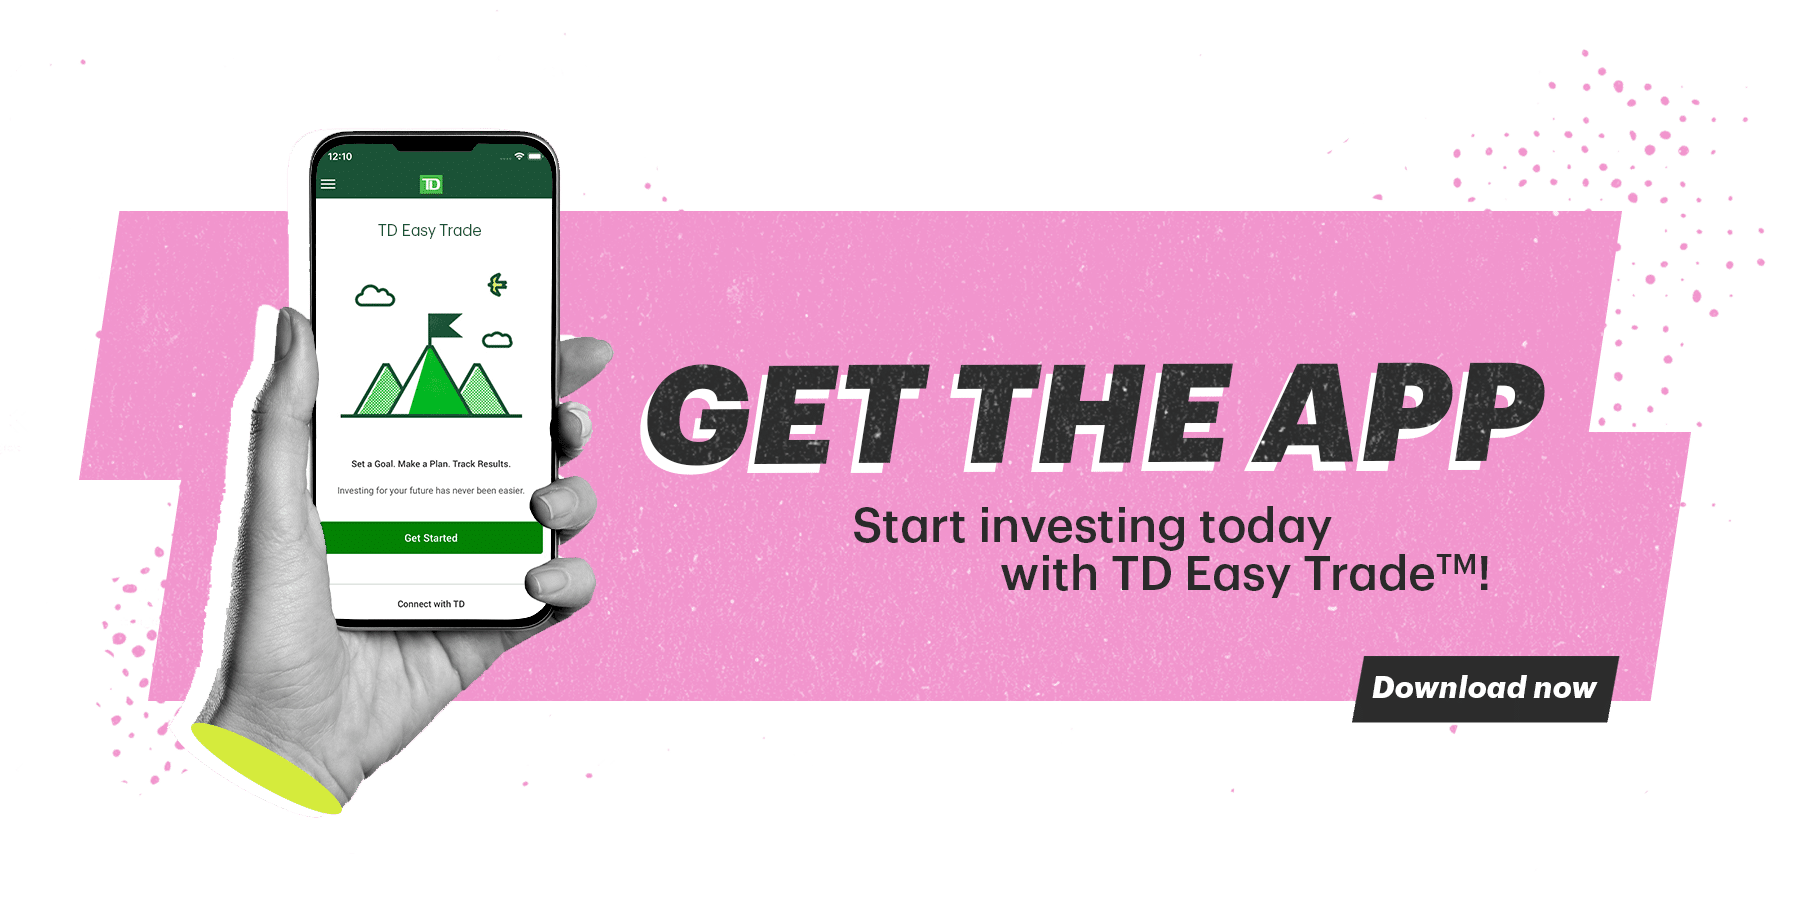 Get the App! Start investing today with TD Easy Trade! Download Now